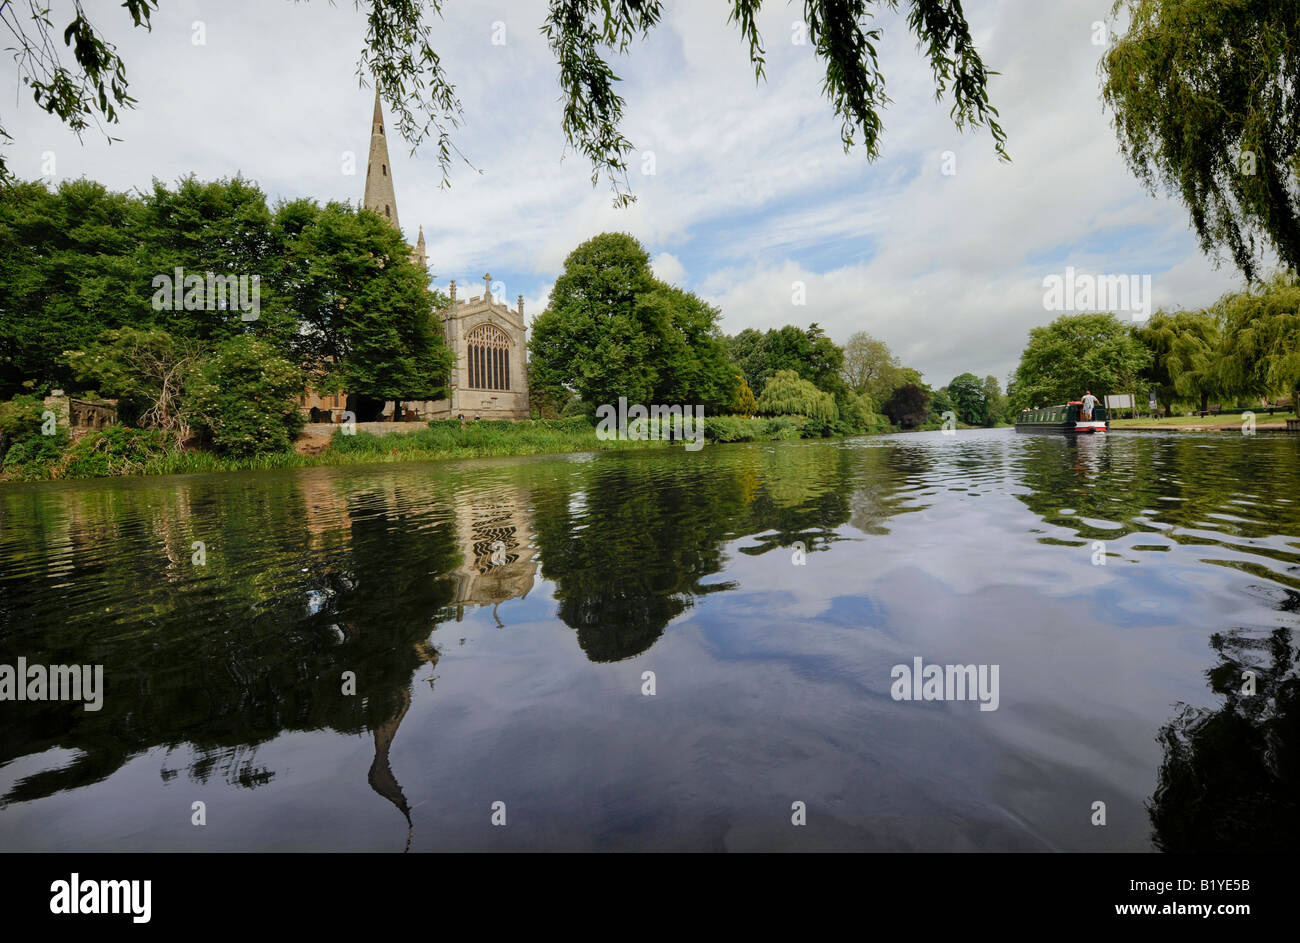 In Stratford-Upon-Avon a narrowboat potters past Holy Trinity Church on the river Avon. Picture by Jim Holden. Stock Photo